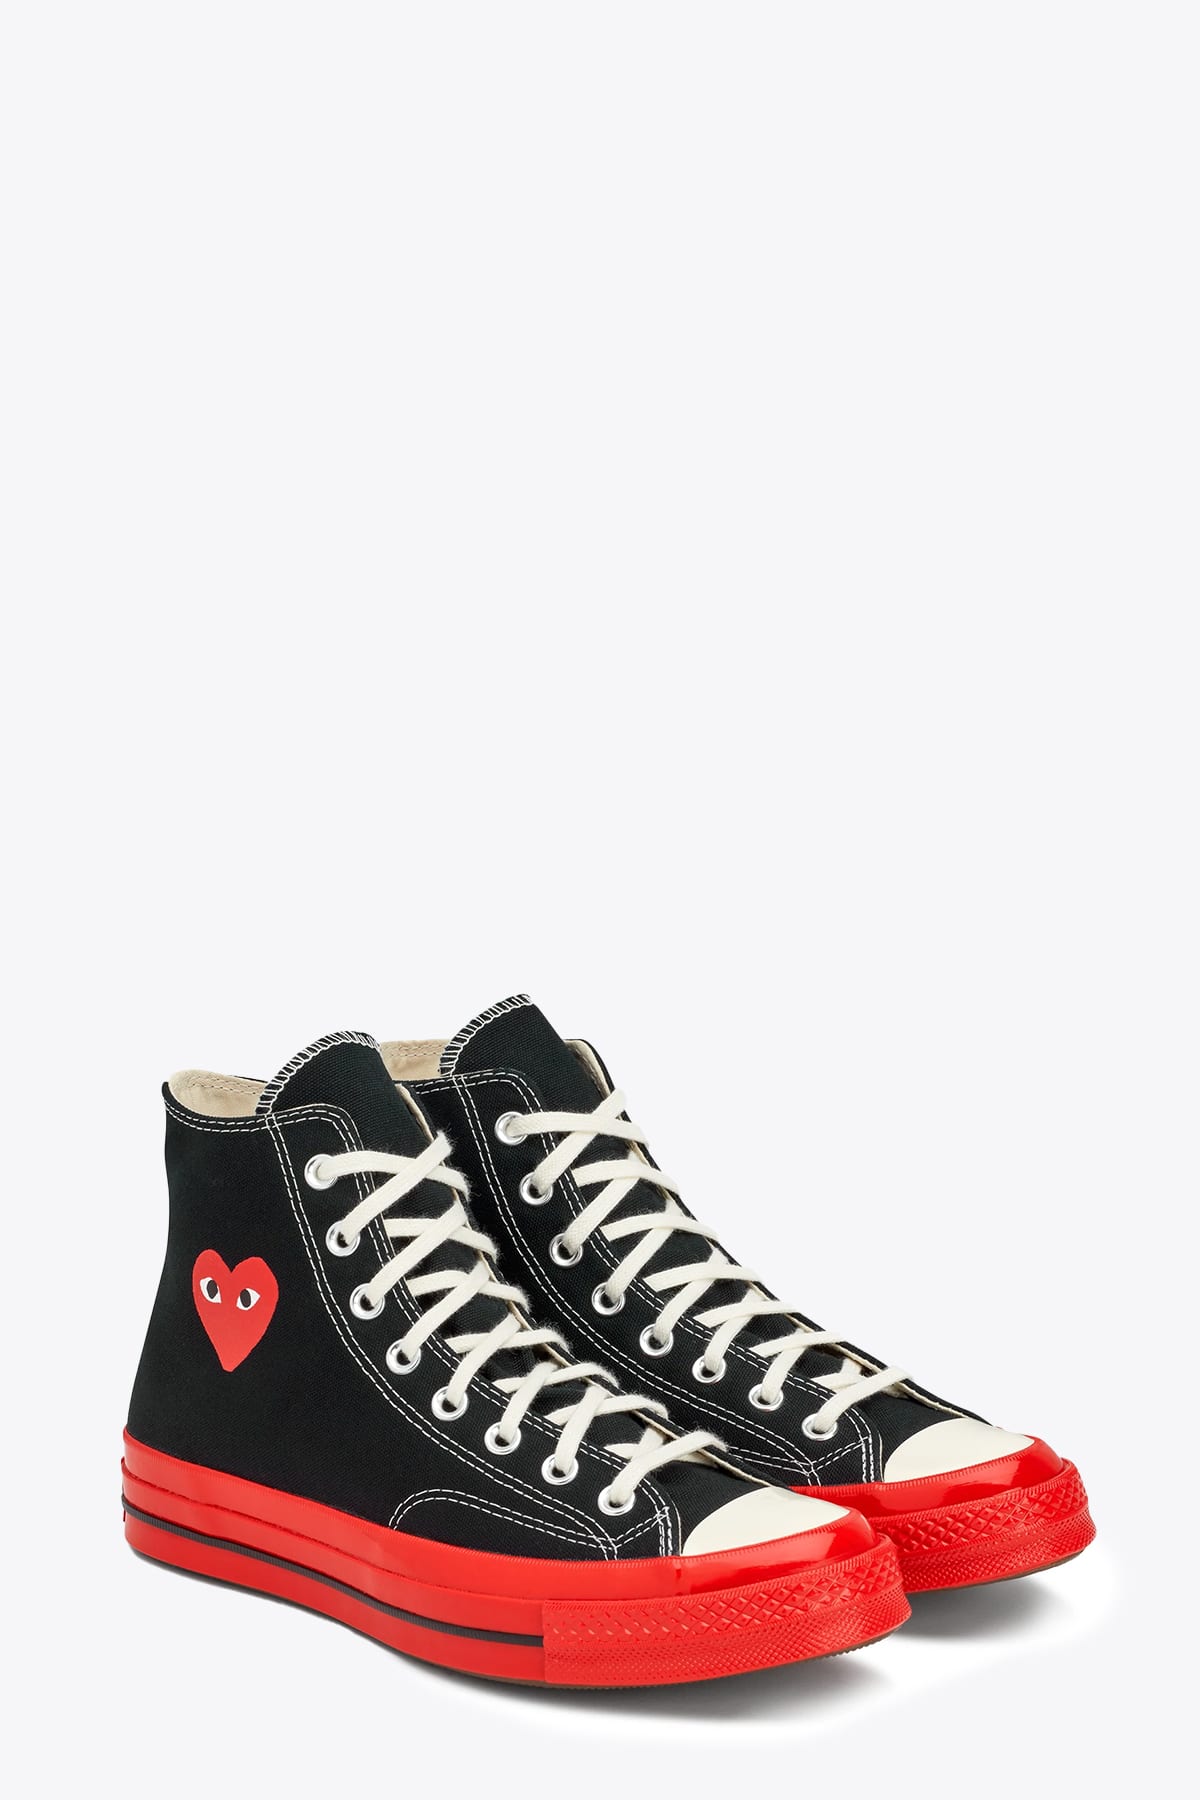 Shop Comme Des Garçons Play Ct70 Hi Top Red Sole Shoes Converse Collaboration Chuck Taylor 70s Black Canvas Sneaker With Red Sol In Nero